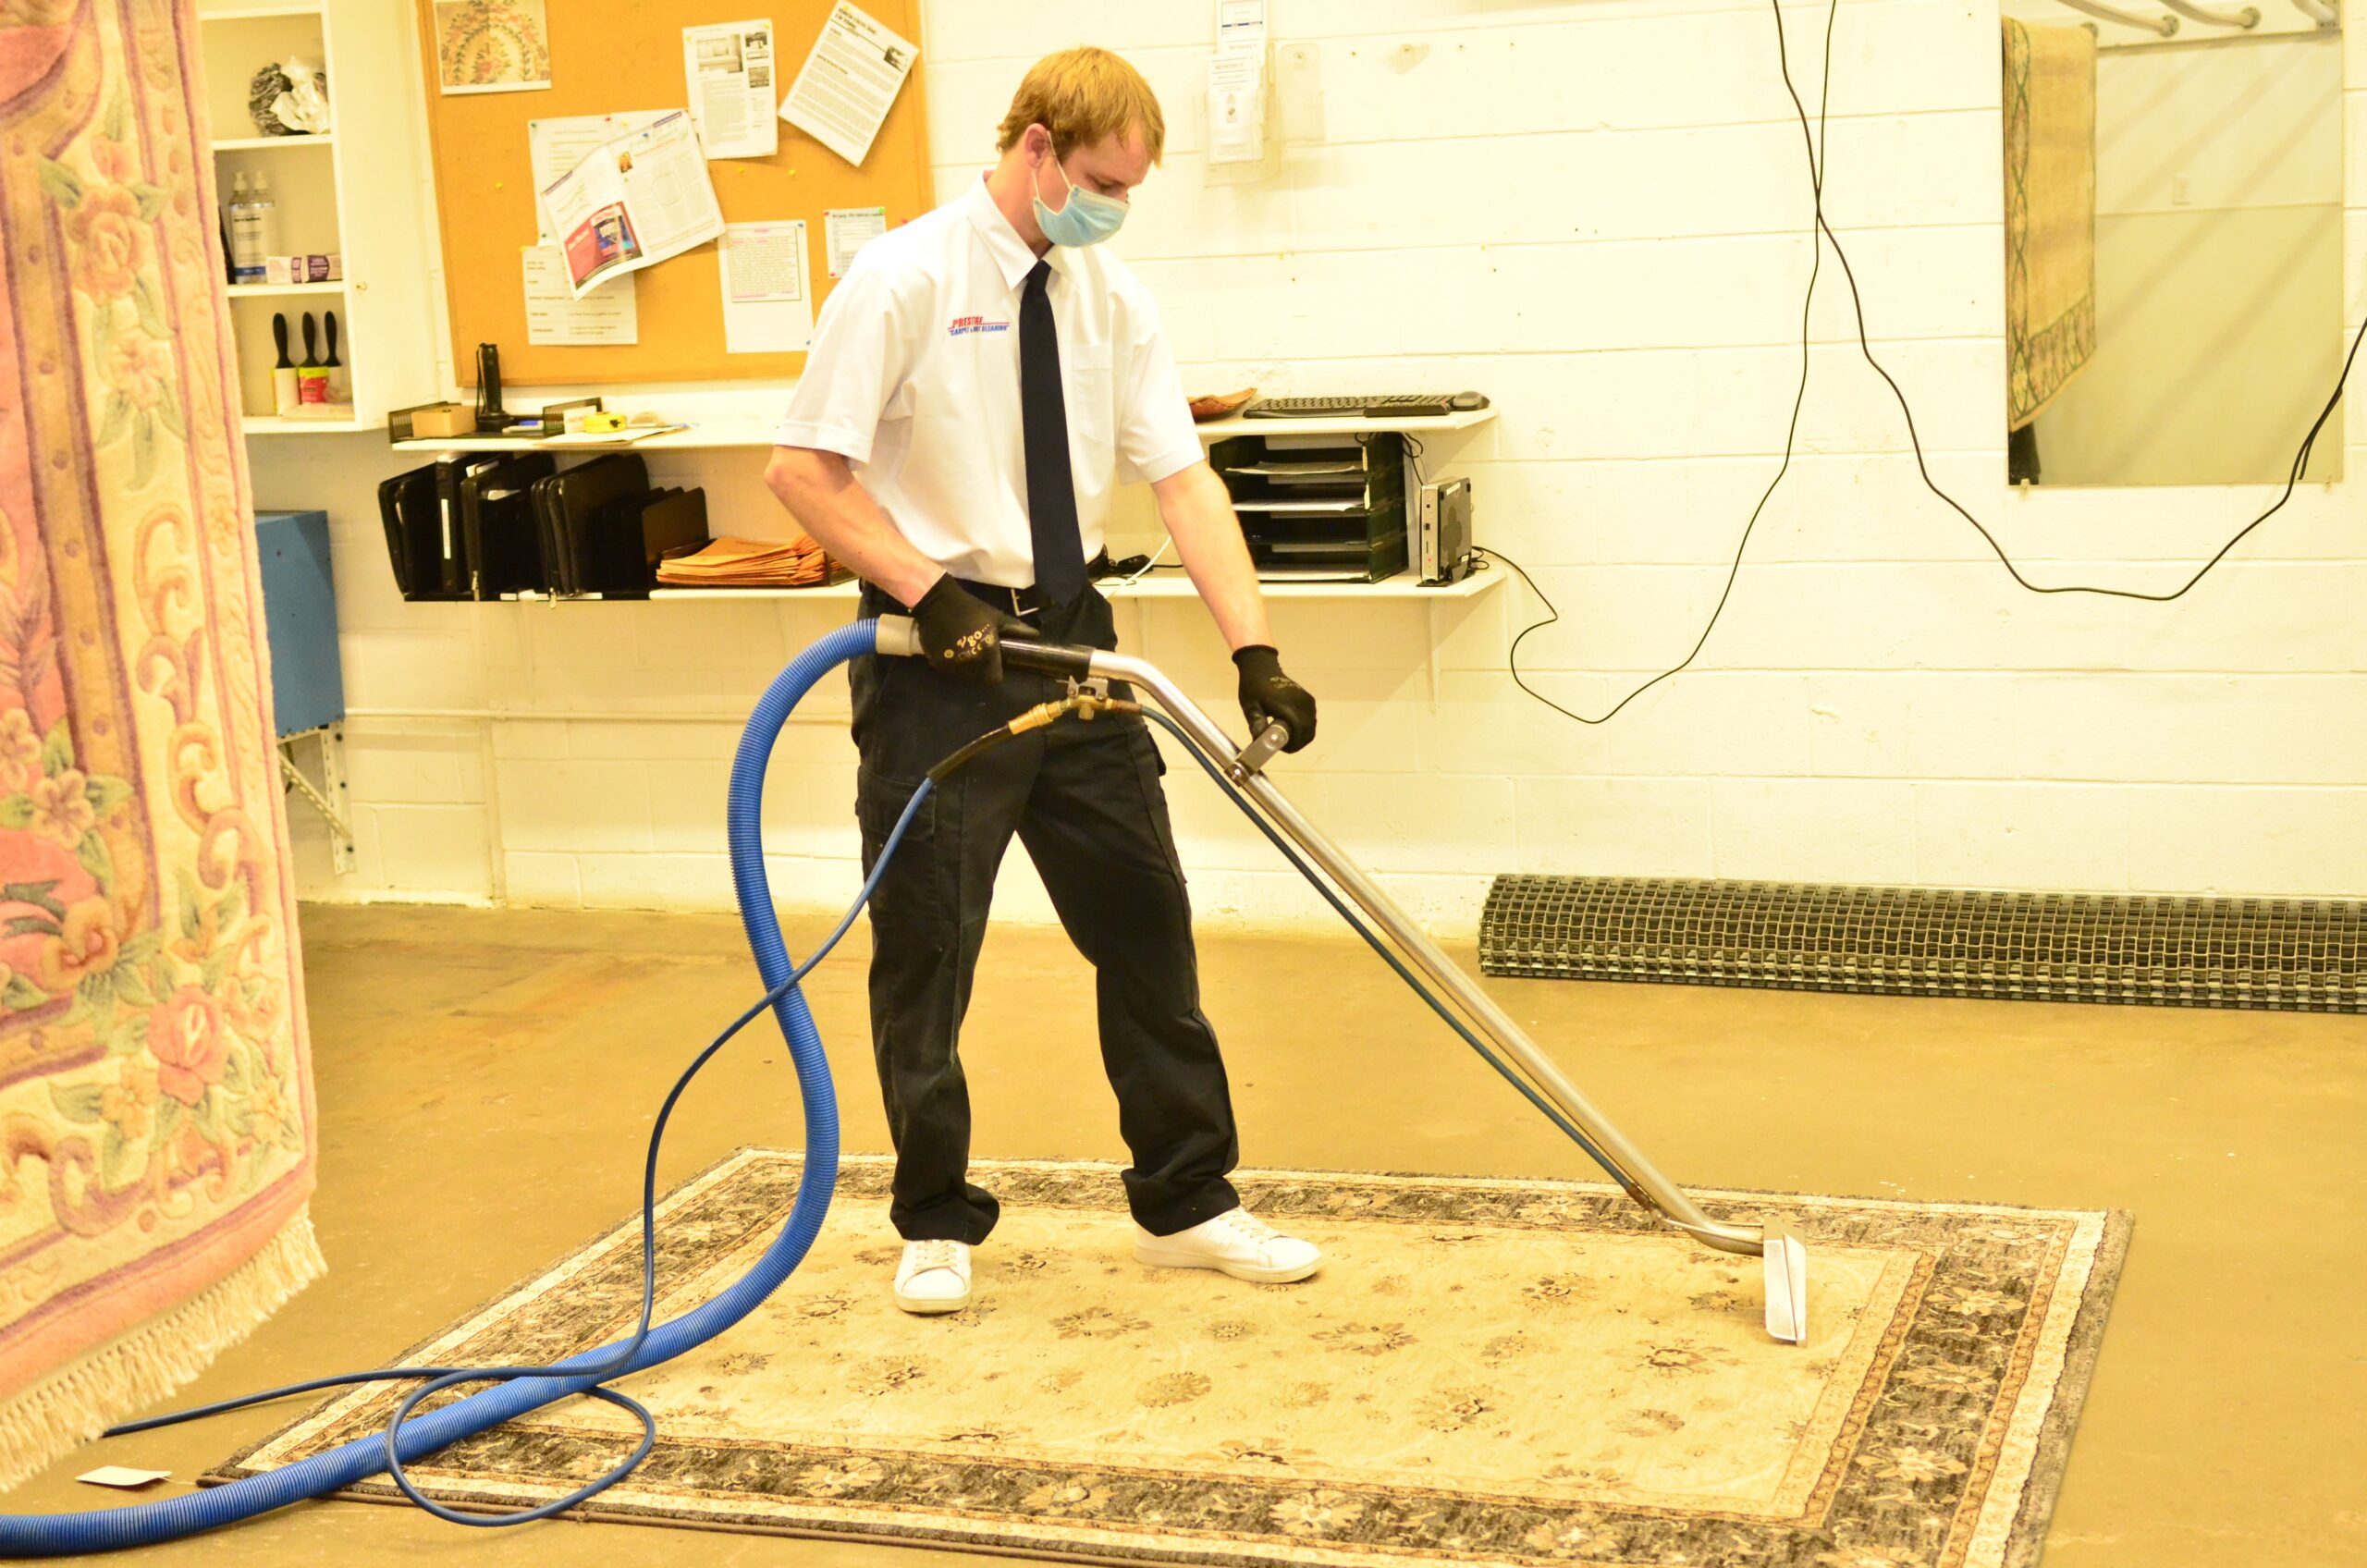 5 TIPS ON HOW TO DRY CARPETS FASTER